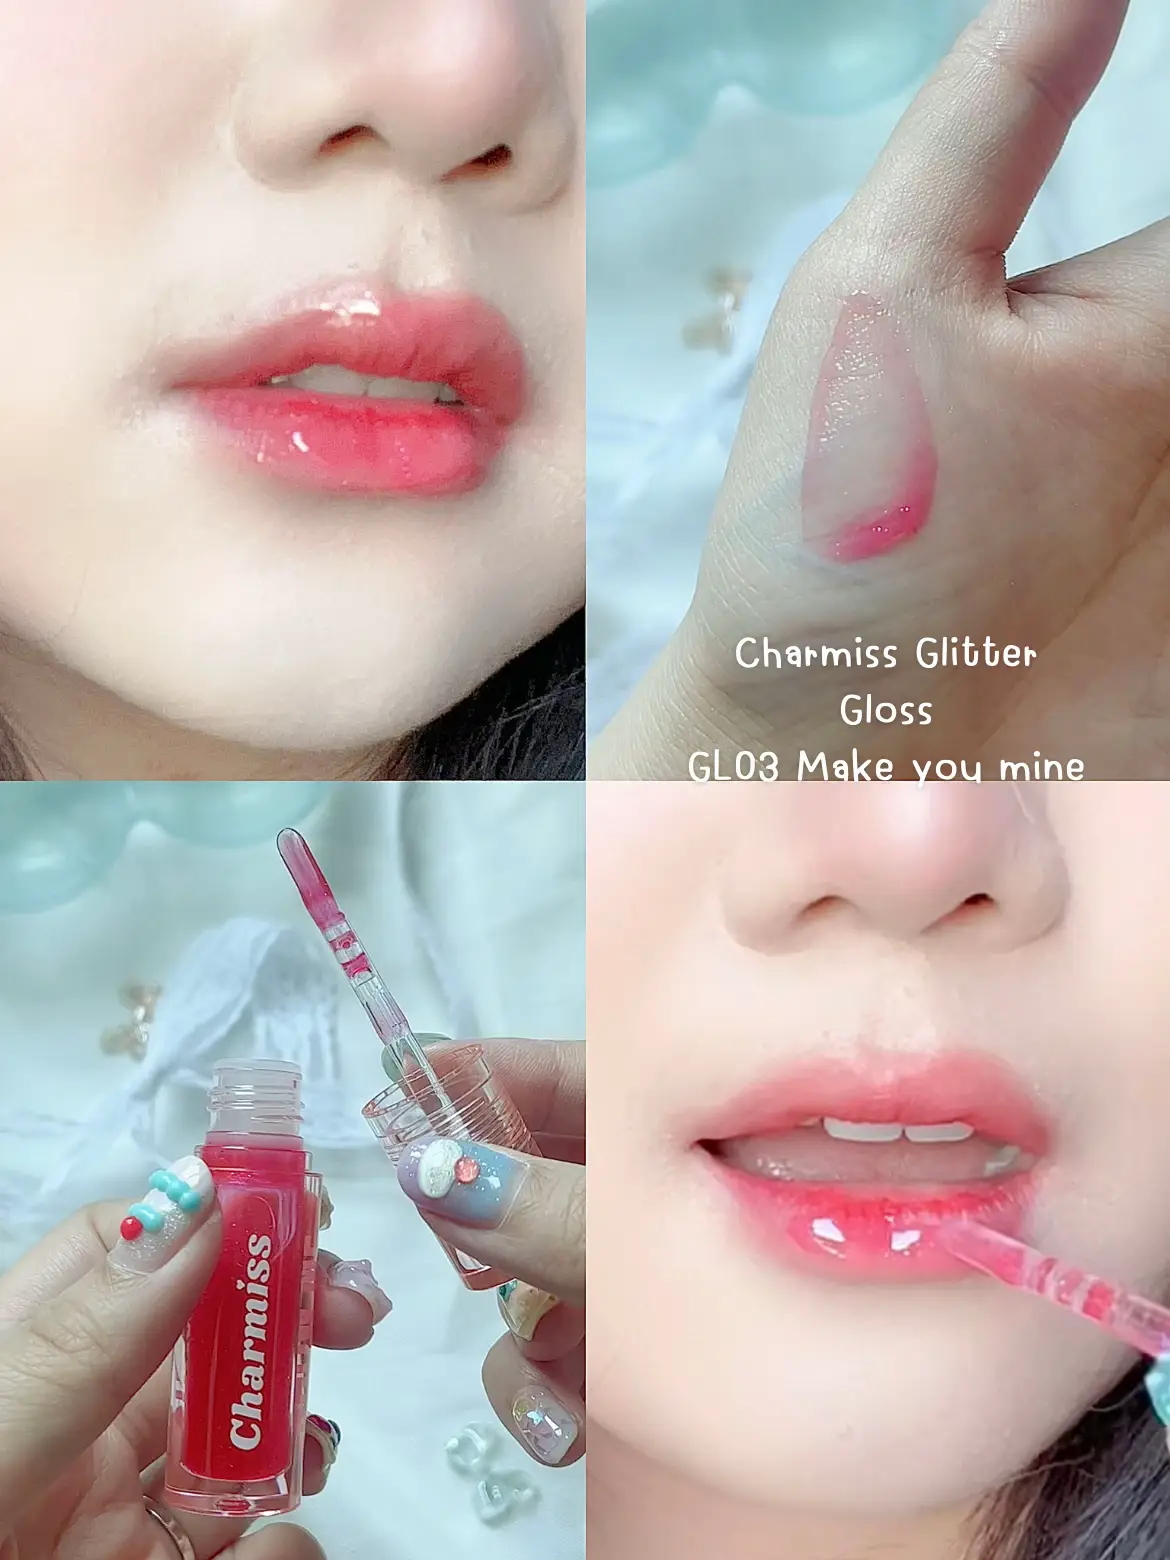 Charmiss Glitter Lip Gloss Medicine Sign❣️✨, Gallery posted by 🍈◟◦  𝒑𝒊𝒂𝒎𝒓𝒖𝒌 ⌗ 🥣